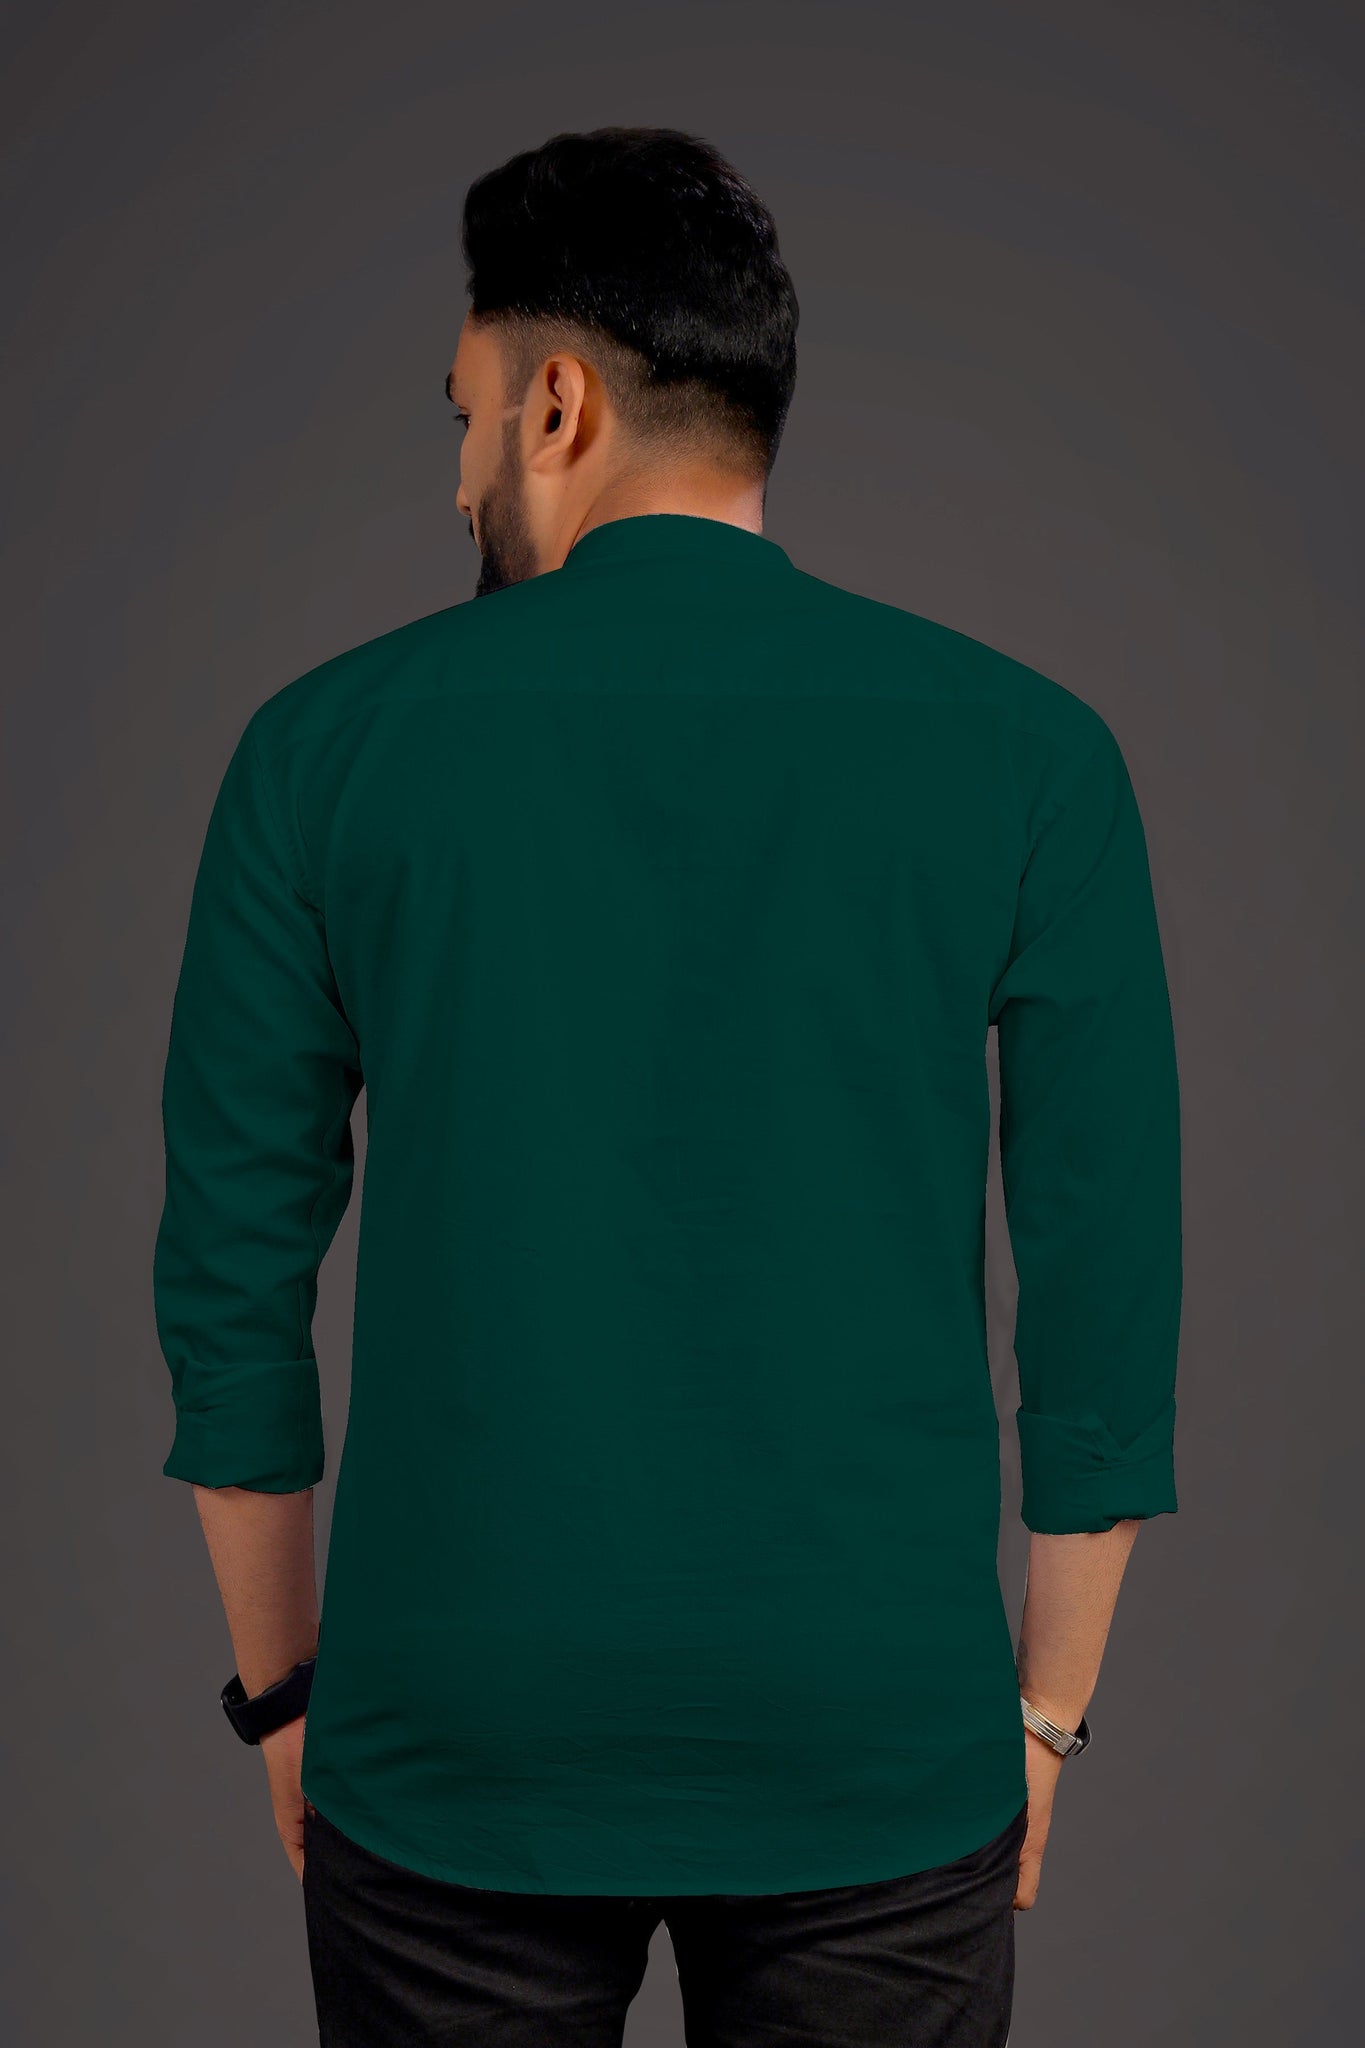 Solid pine green Cotton Kurta Shirt For Men With Wooden Button